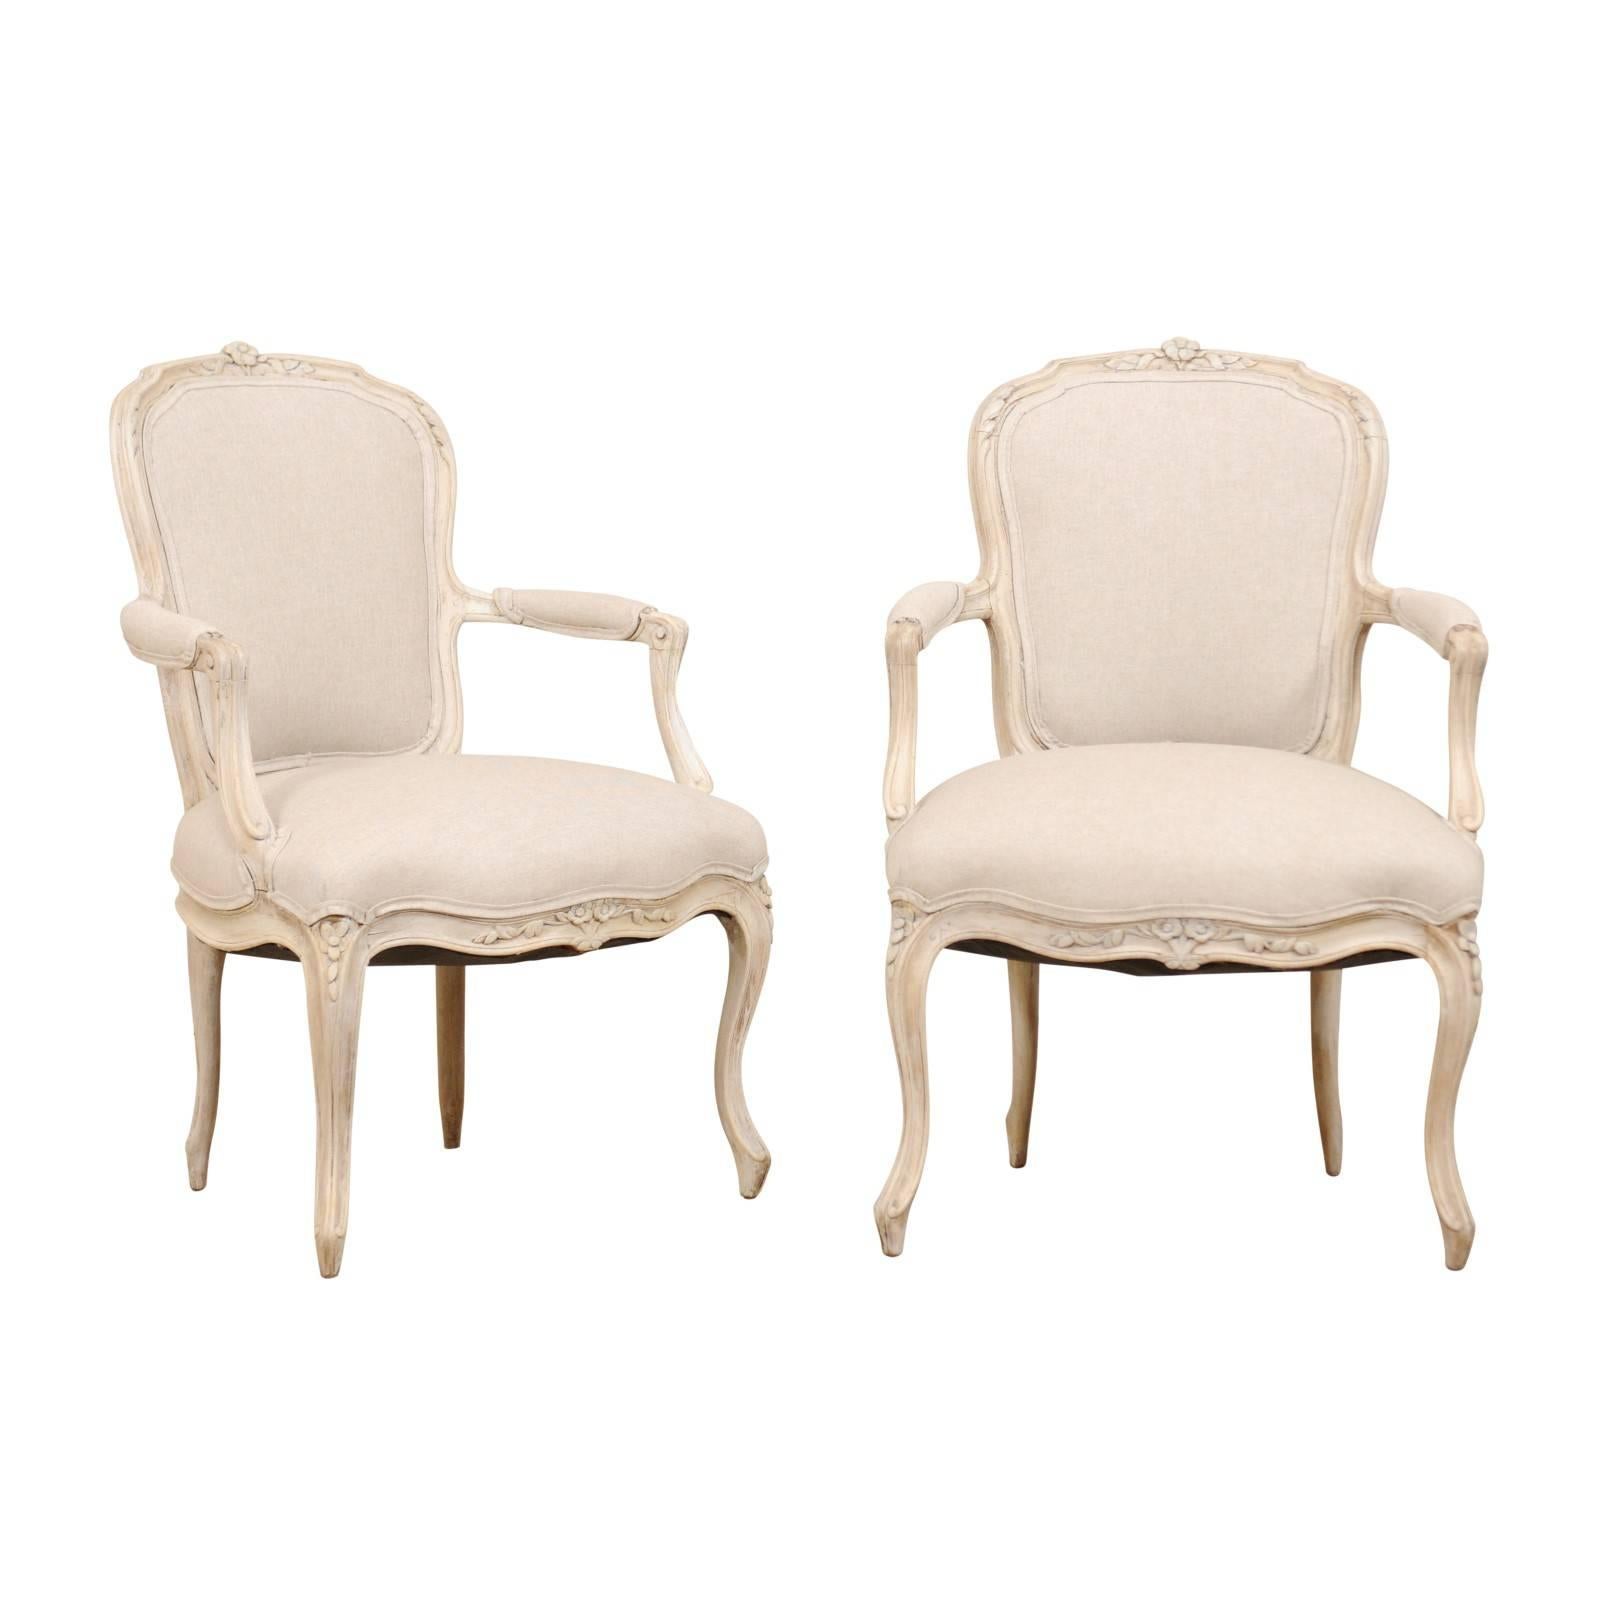 Pair of Swedish Louis XVI Style Armchairs from the Mid-20th Century